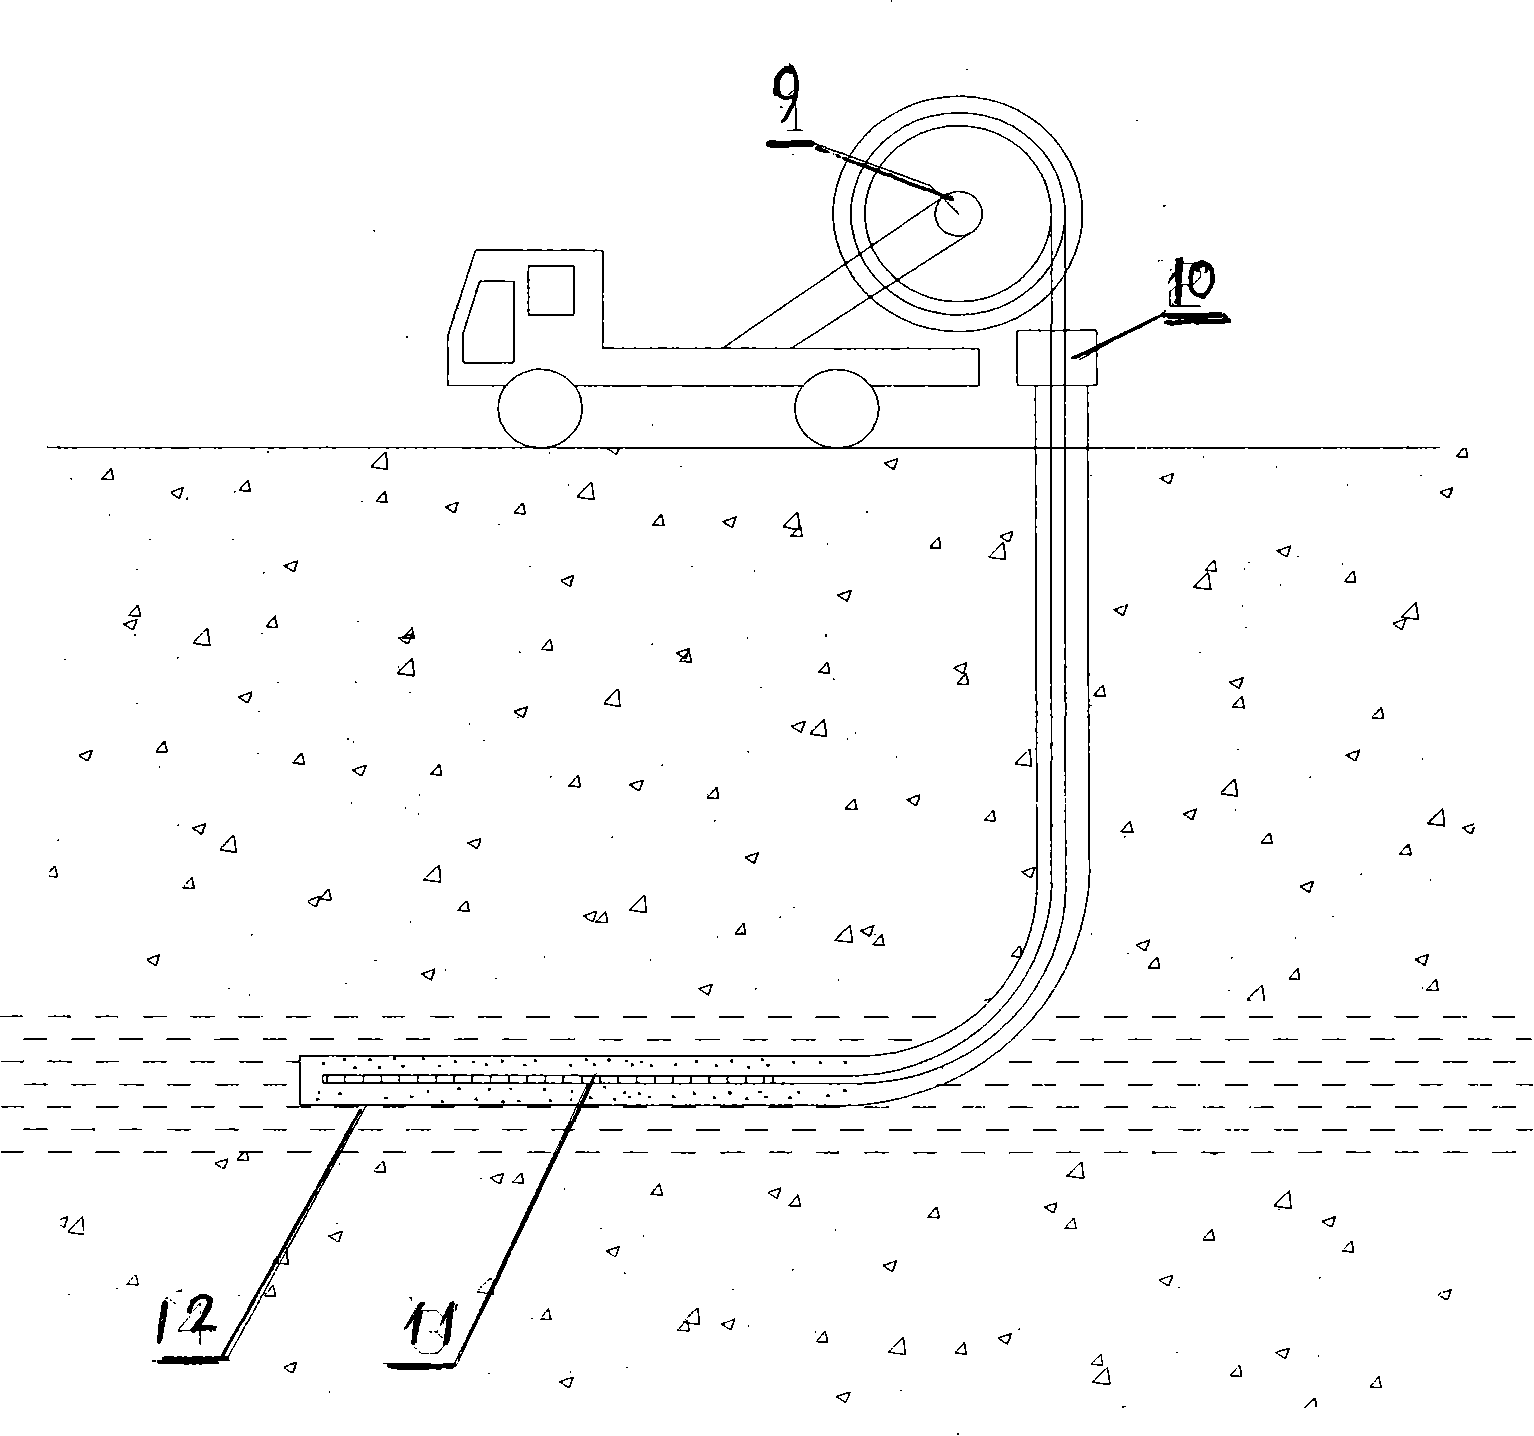 Optical fiber sensing method for synchronously testing temperature and pressure below horizontal well